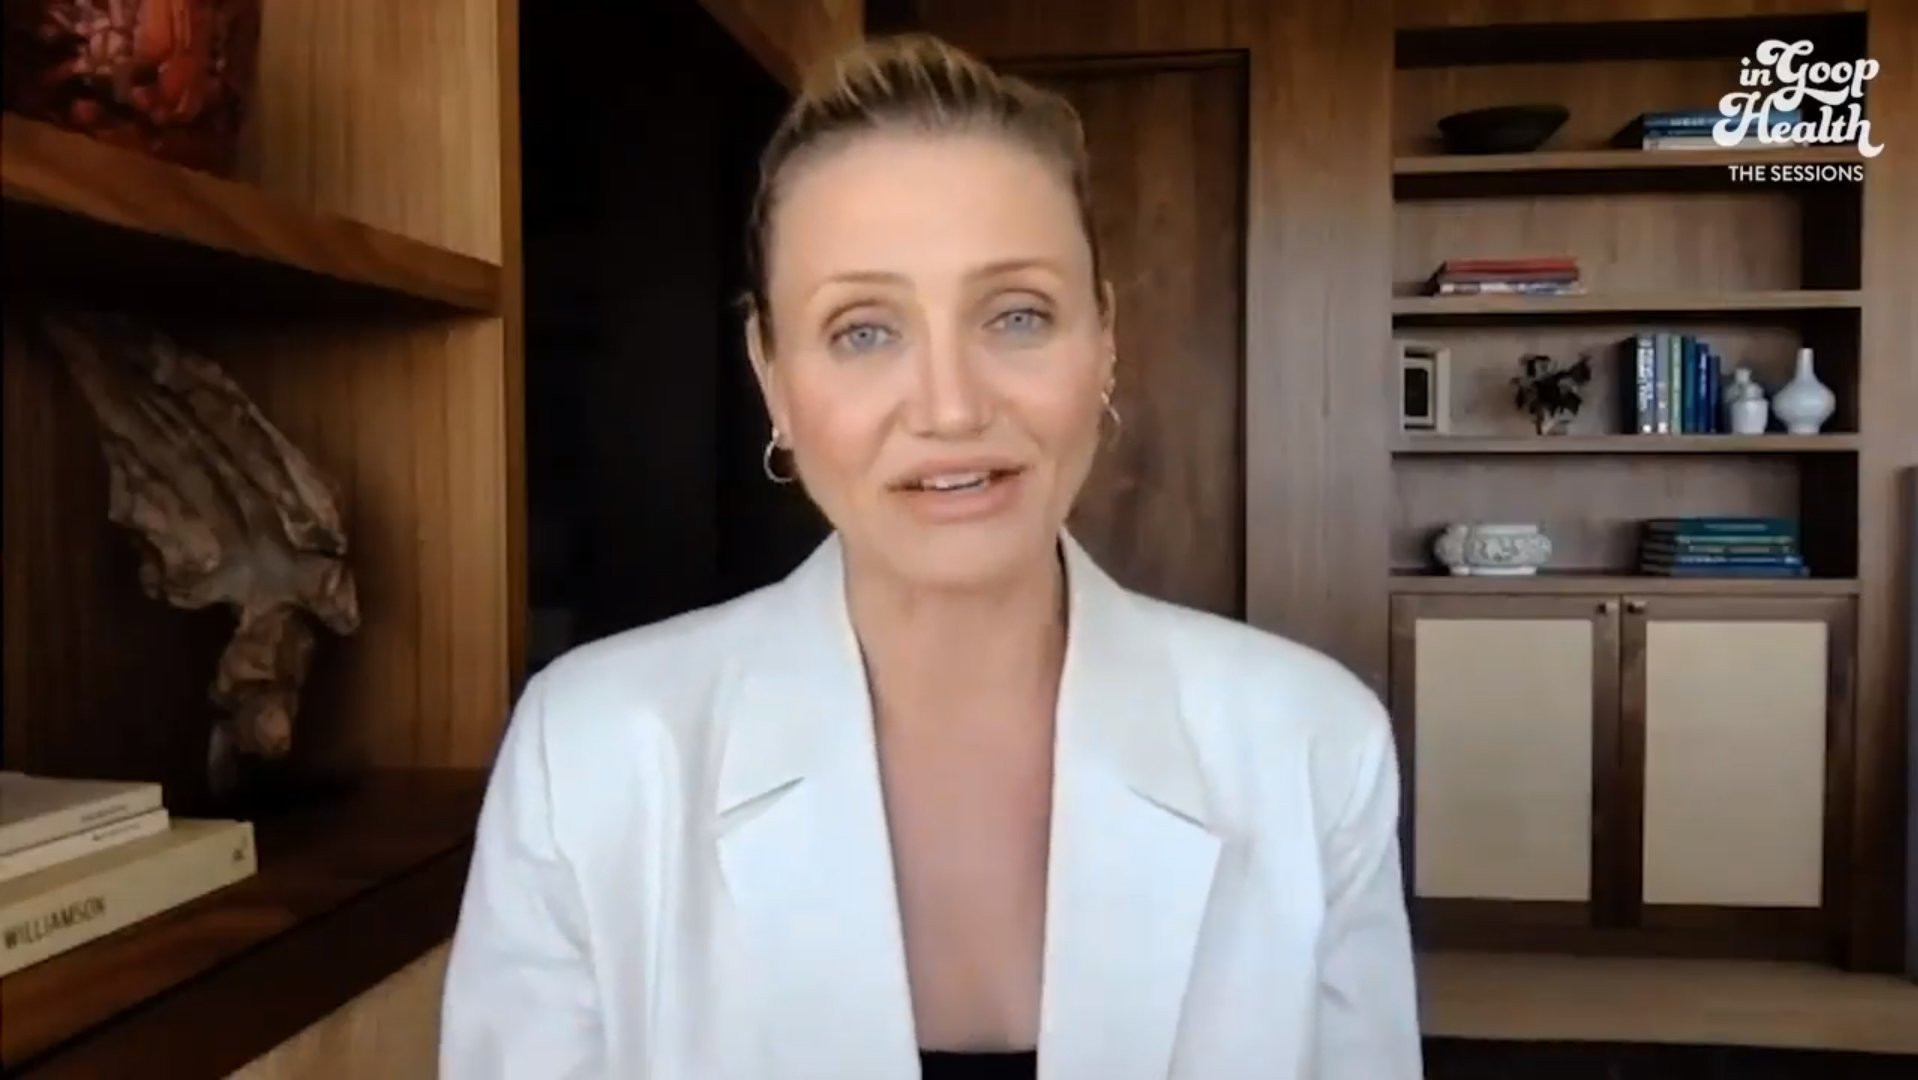 Cameron Diaz says she currently doesn’t ‘have what it takes’ to make movies as she focuses on family